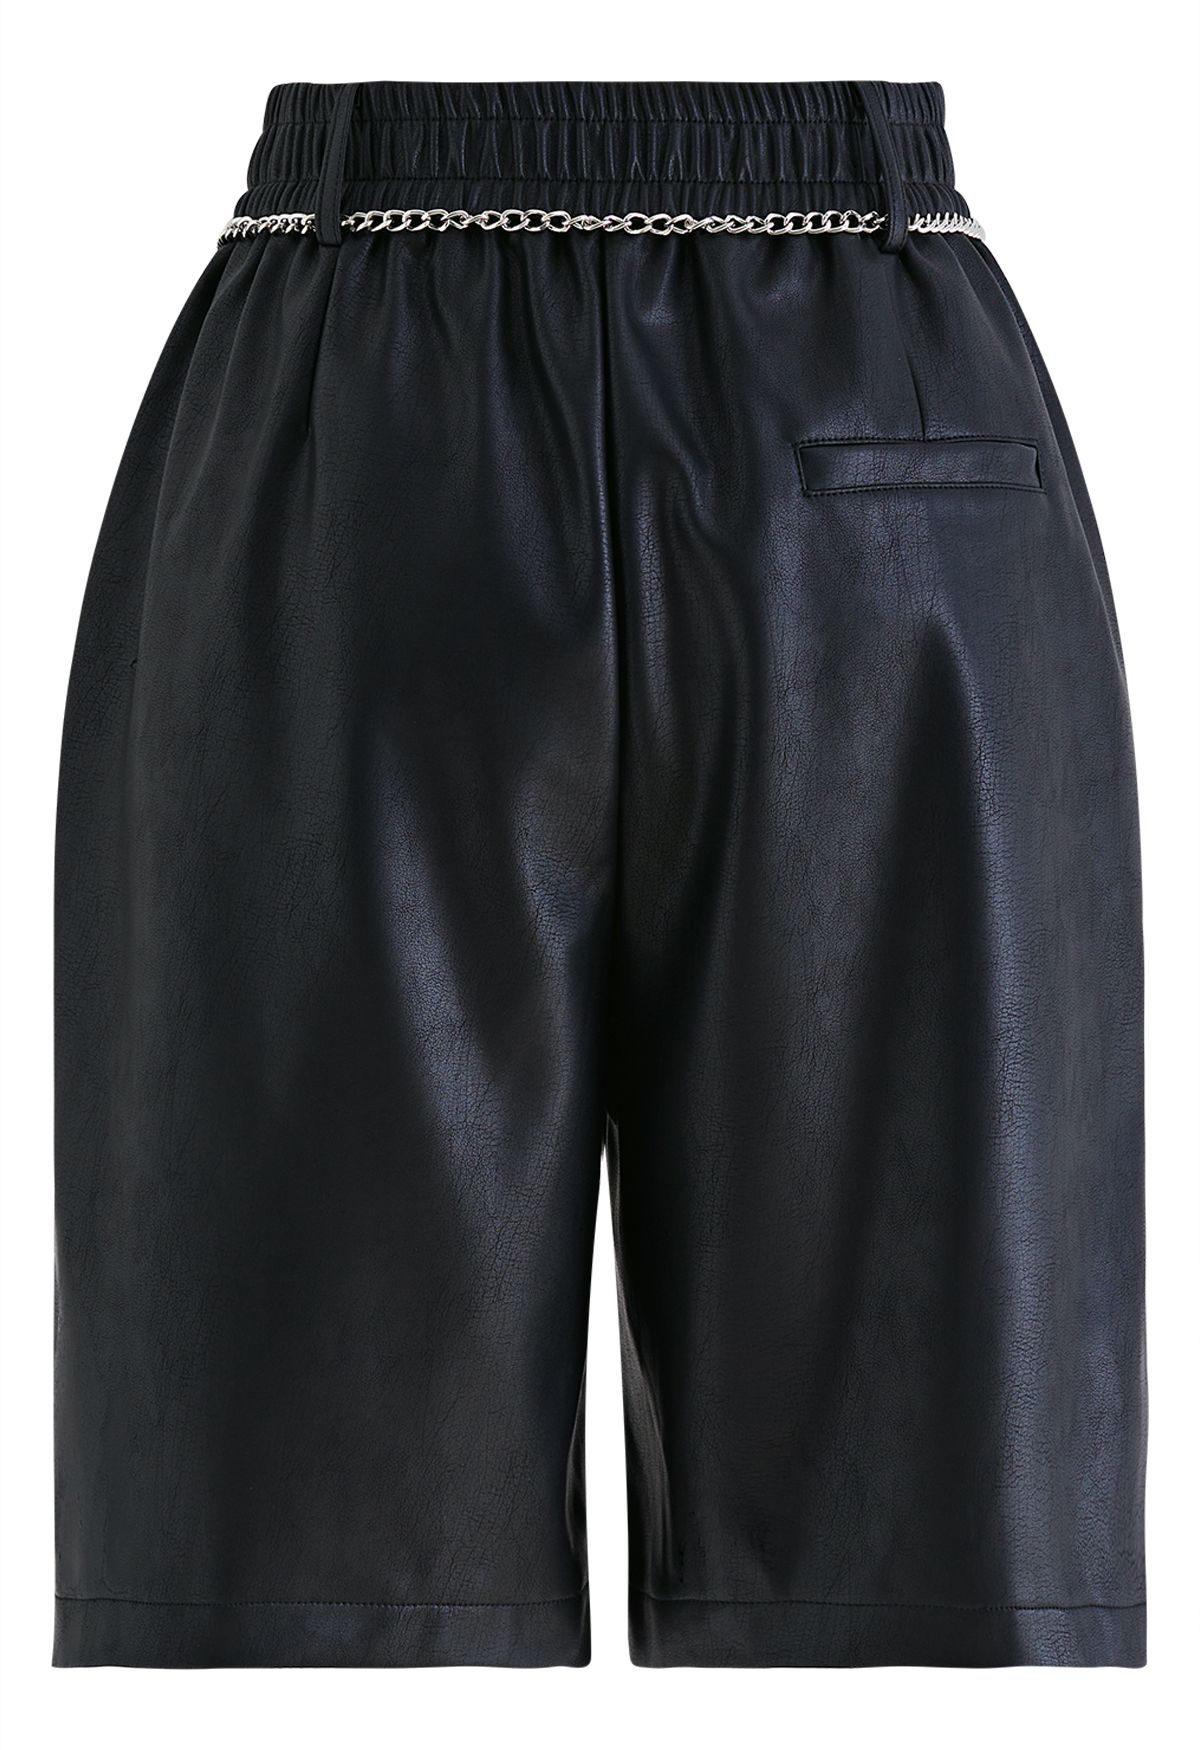 Silver Chain Faux Leather Shorts in Black - Retro, Indie and Unique Fashion